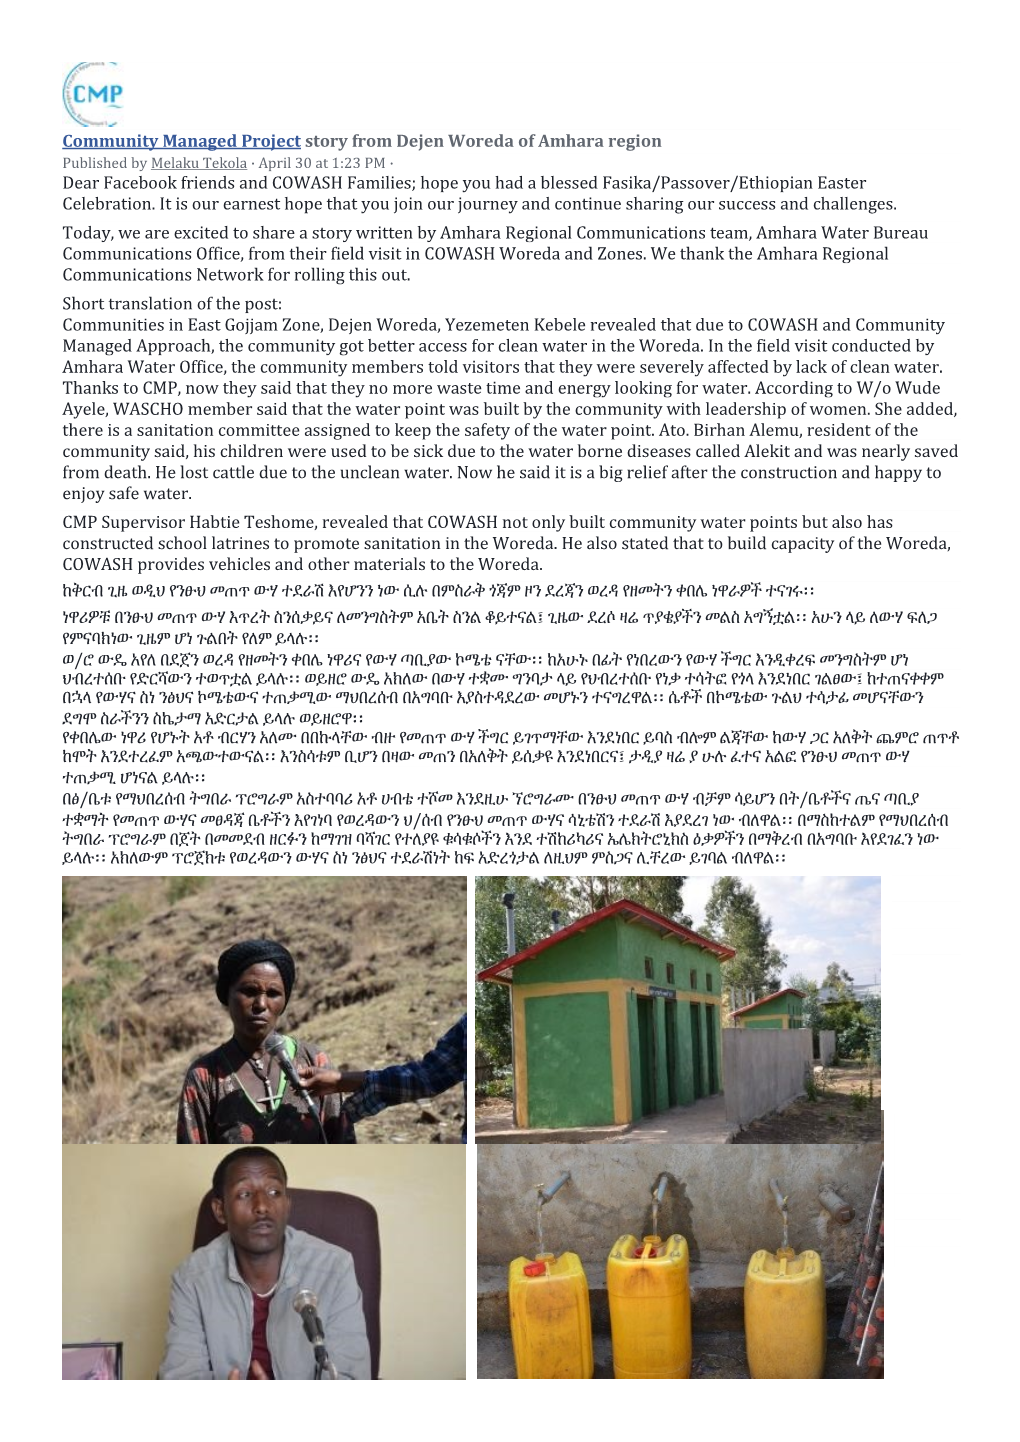 Community Managed Project Story from Dejen Woreda of Amhara